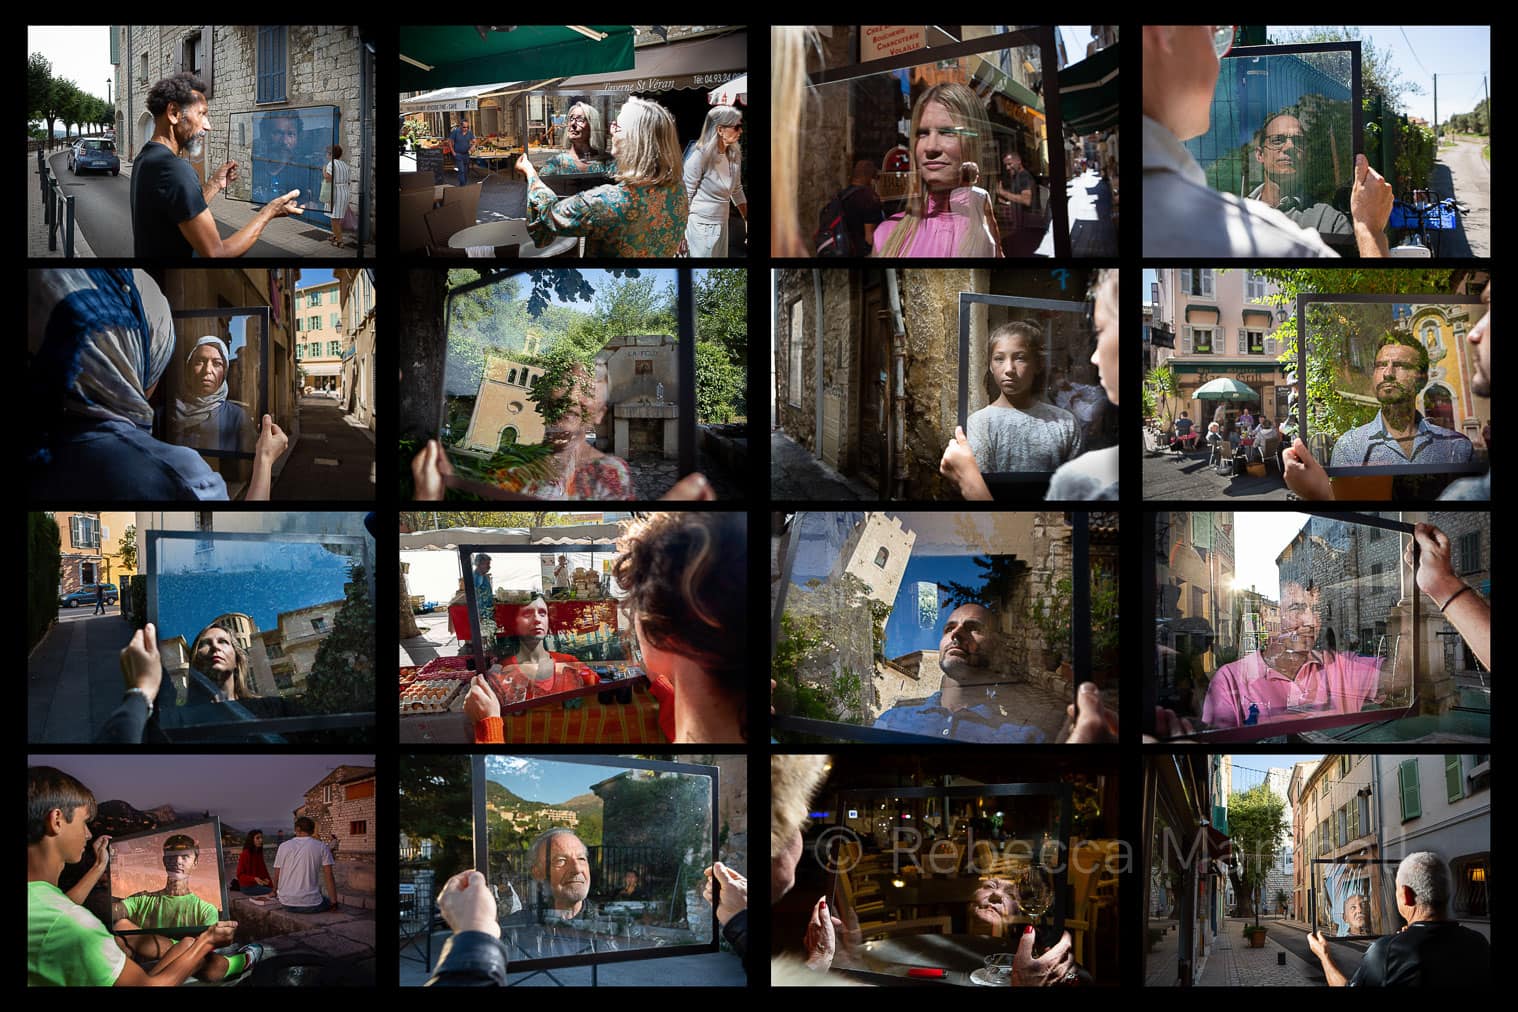 Digital contact sheet showing 16 photographs of the reflections of people in a sheet of glass they're holding, set in varied townscapes